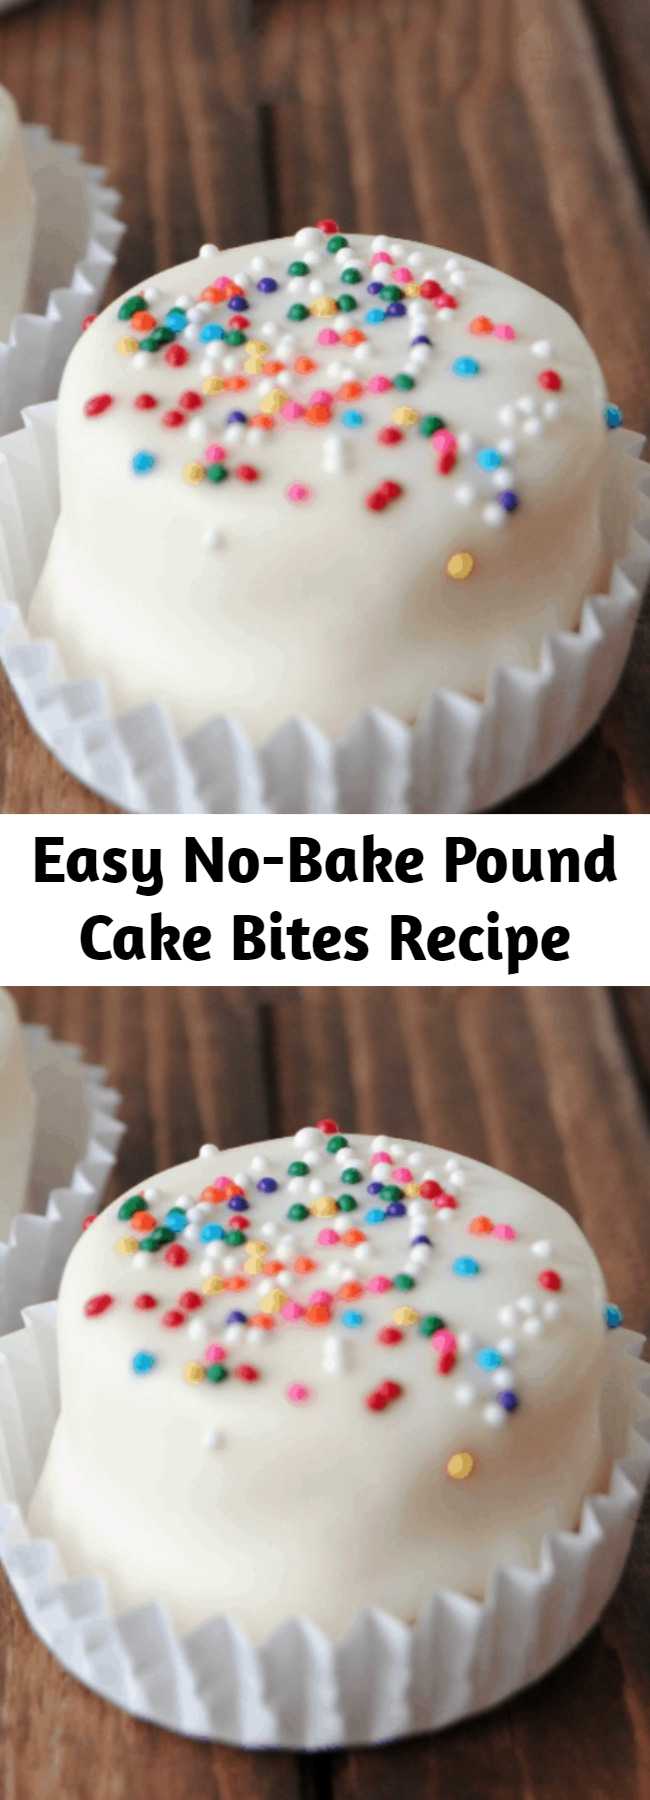 Easy No-Bake Pound Cake Bites Recipe - Celebrate National #PoundCakeDay with these adorable no-bake pound cake bites! They look like itty bitty cakes but they are SUPER easy to make.